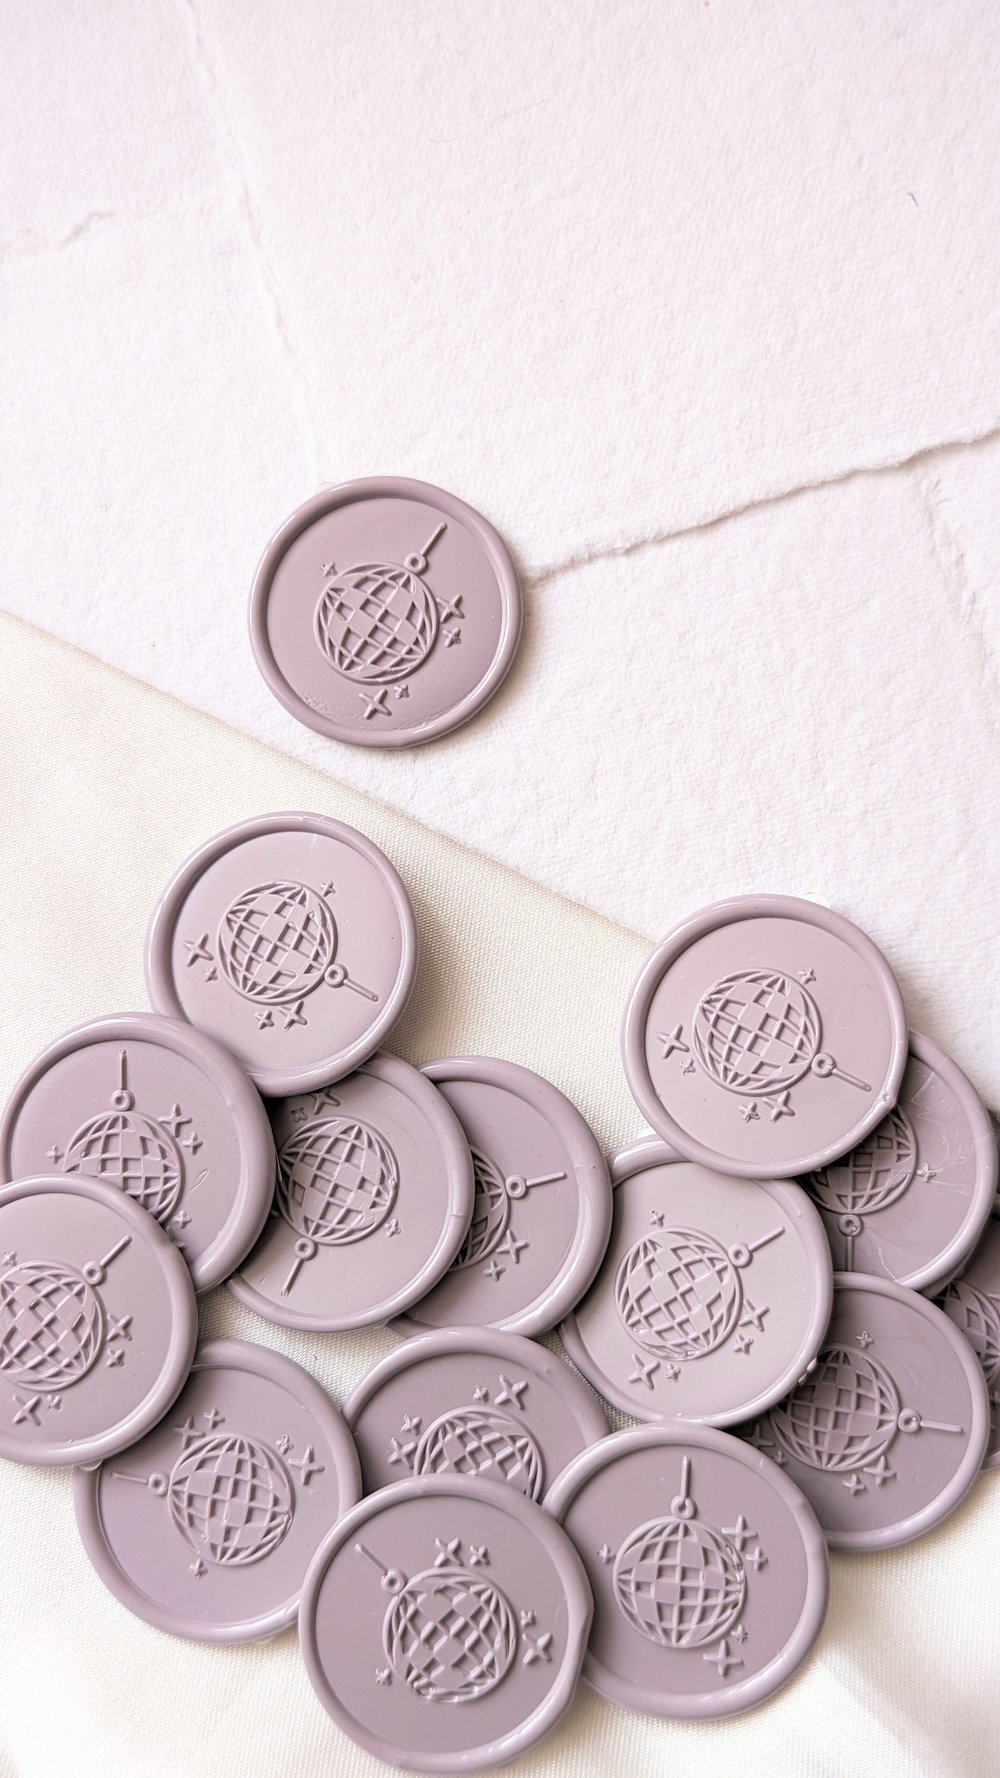 Sealing Wax, Anezus 645pcs Wax Letter Seal Kit with Wax Seal